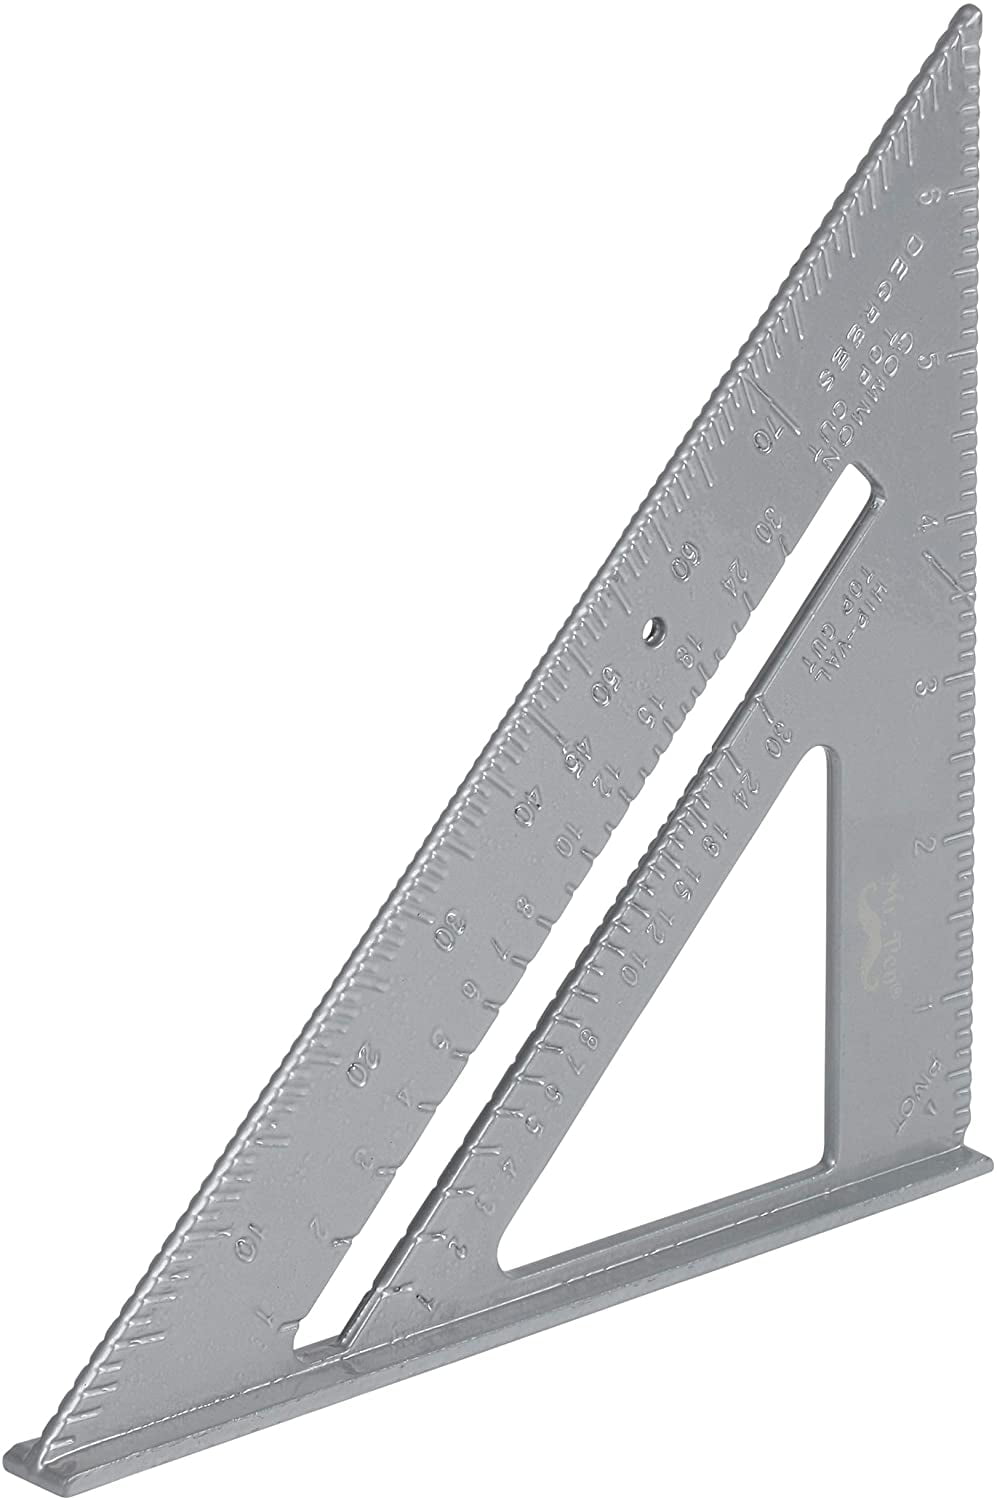 New 7" Aluminum Roofing Roofer Square Carpenters Wood Working 7 Inch Alloy Tool 